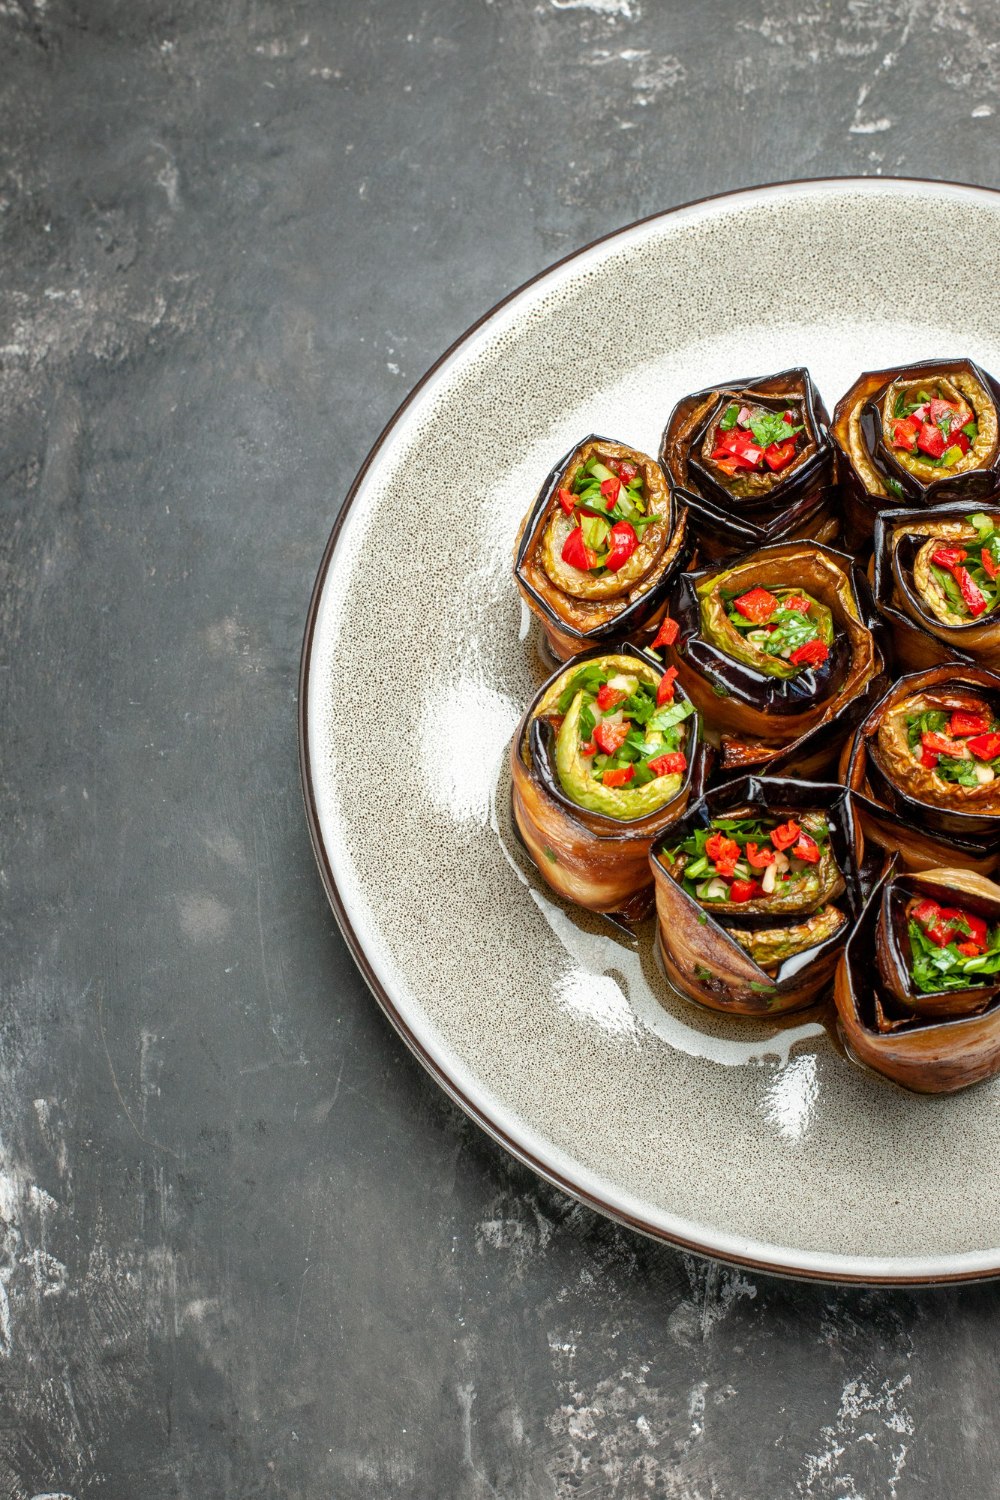 Read more about the article Baked eggplant recipes for Every Occasion